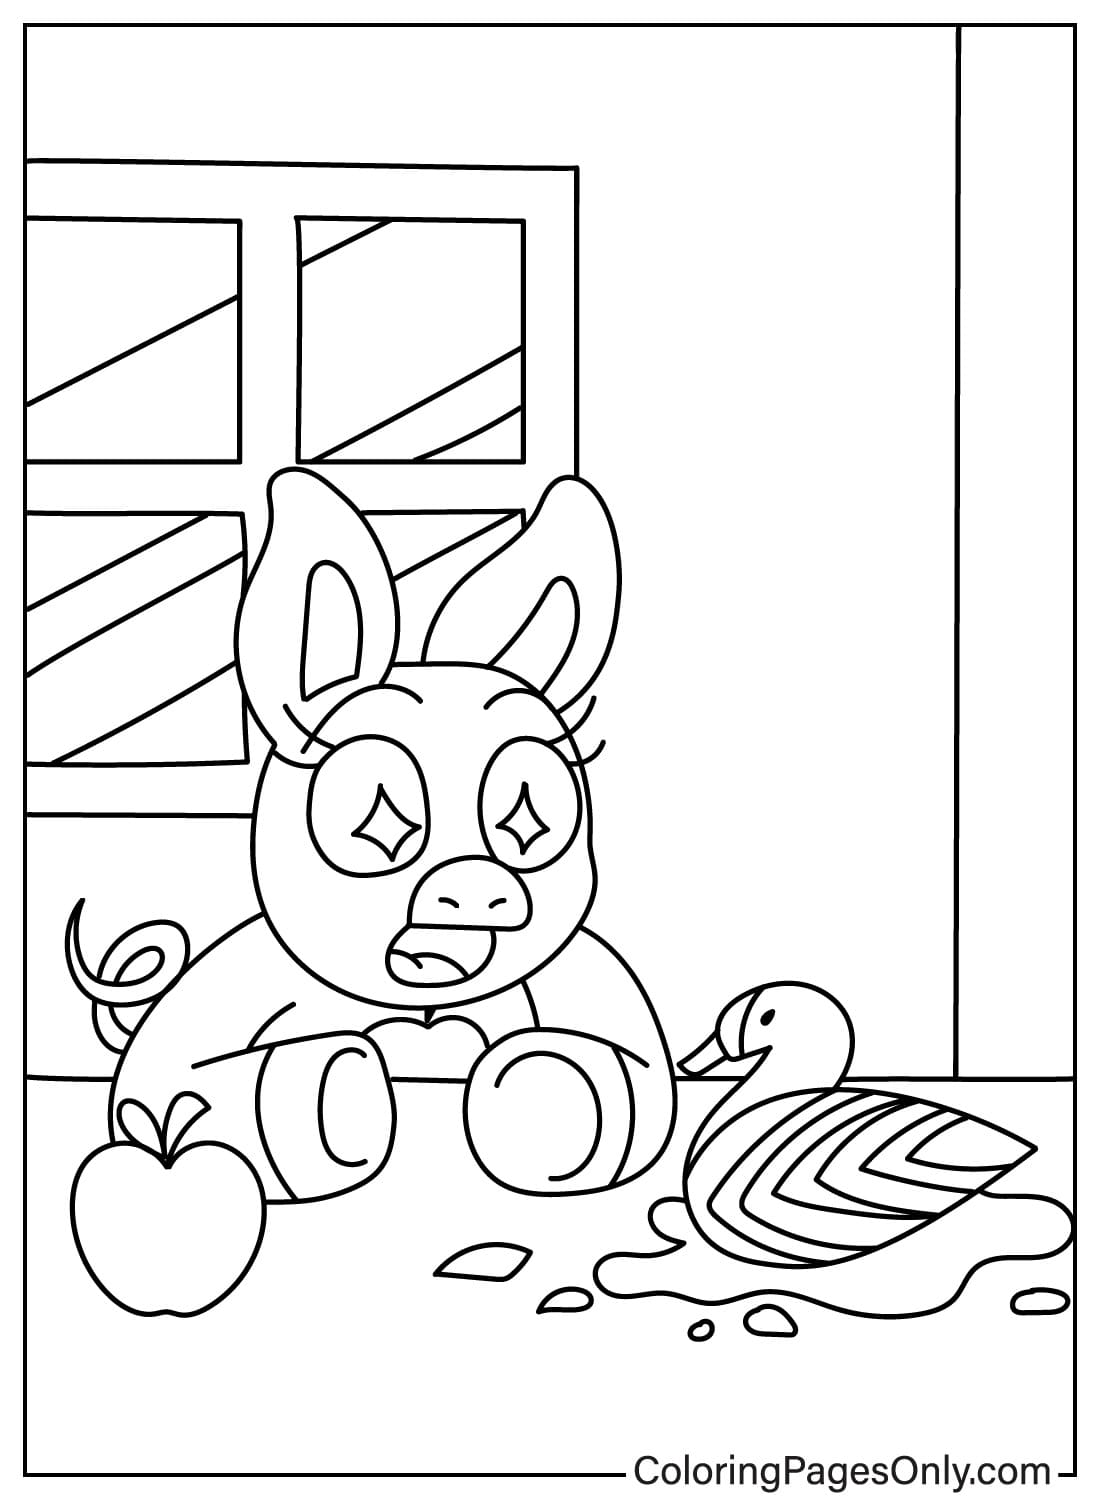 Happy PickyPiggy Coloring Page from PickyPiggy